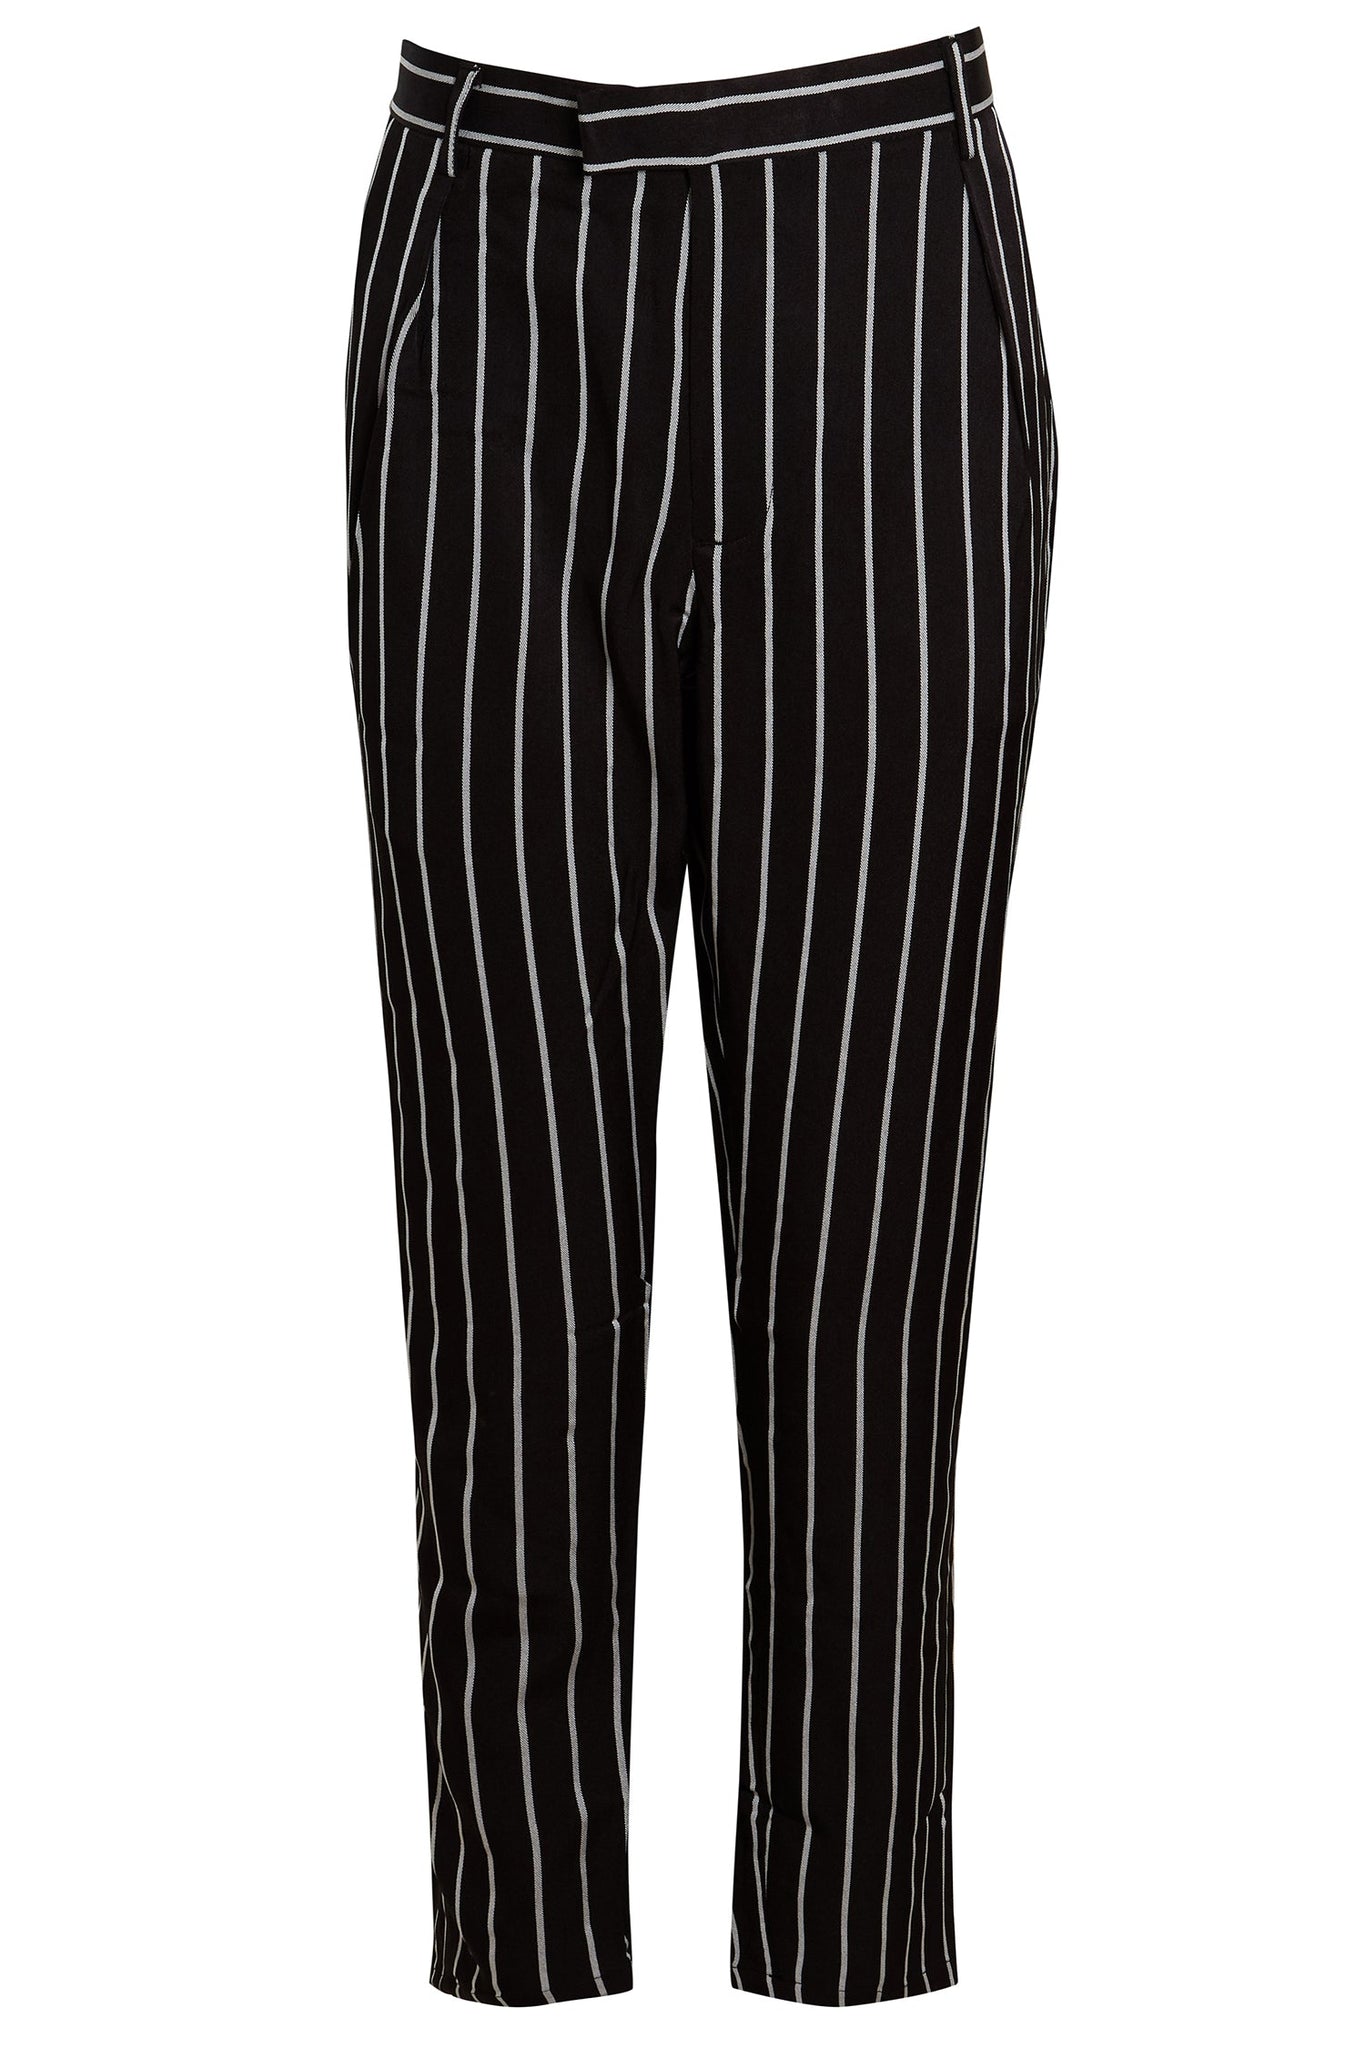 STRIPE TAILORED TURN-UP TROUSER